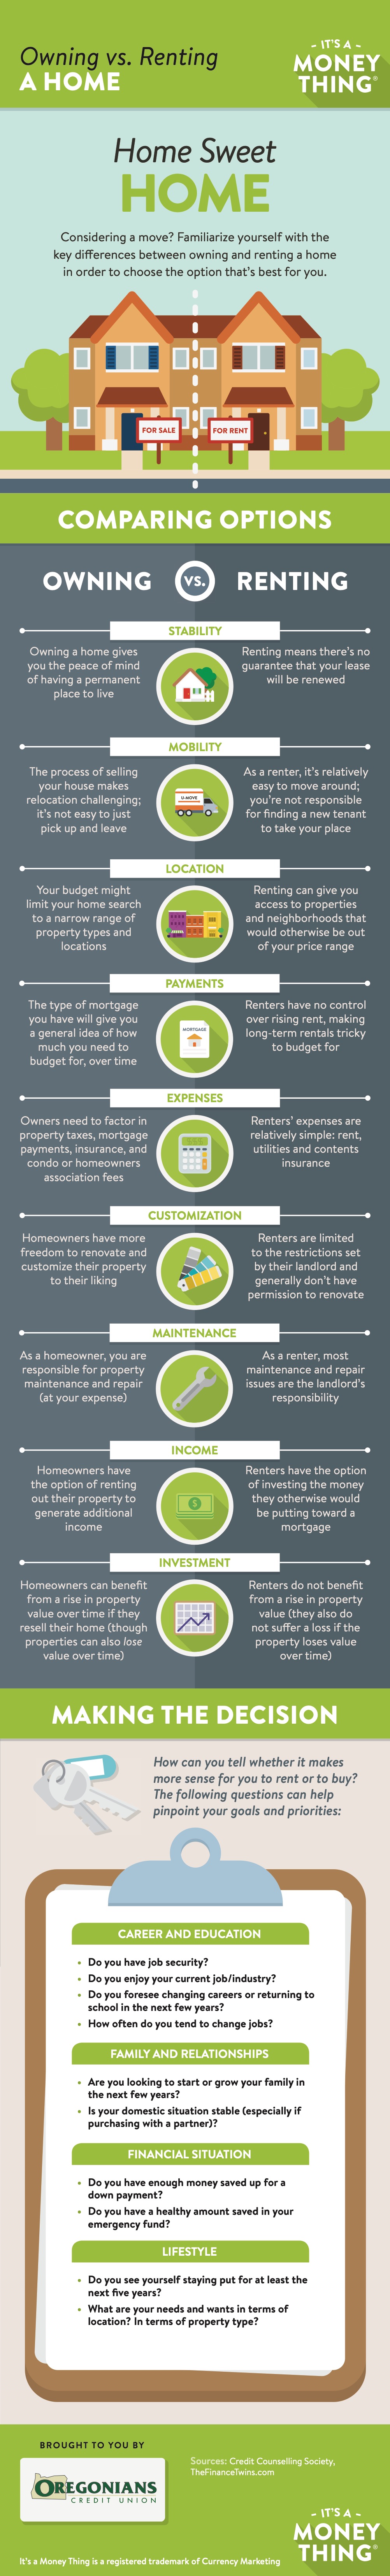 Buying Vs. Renting Infographic